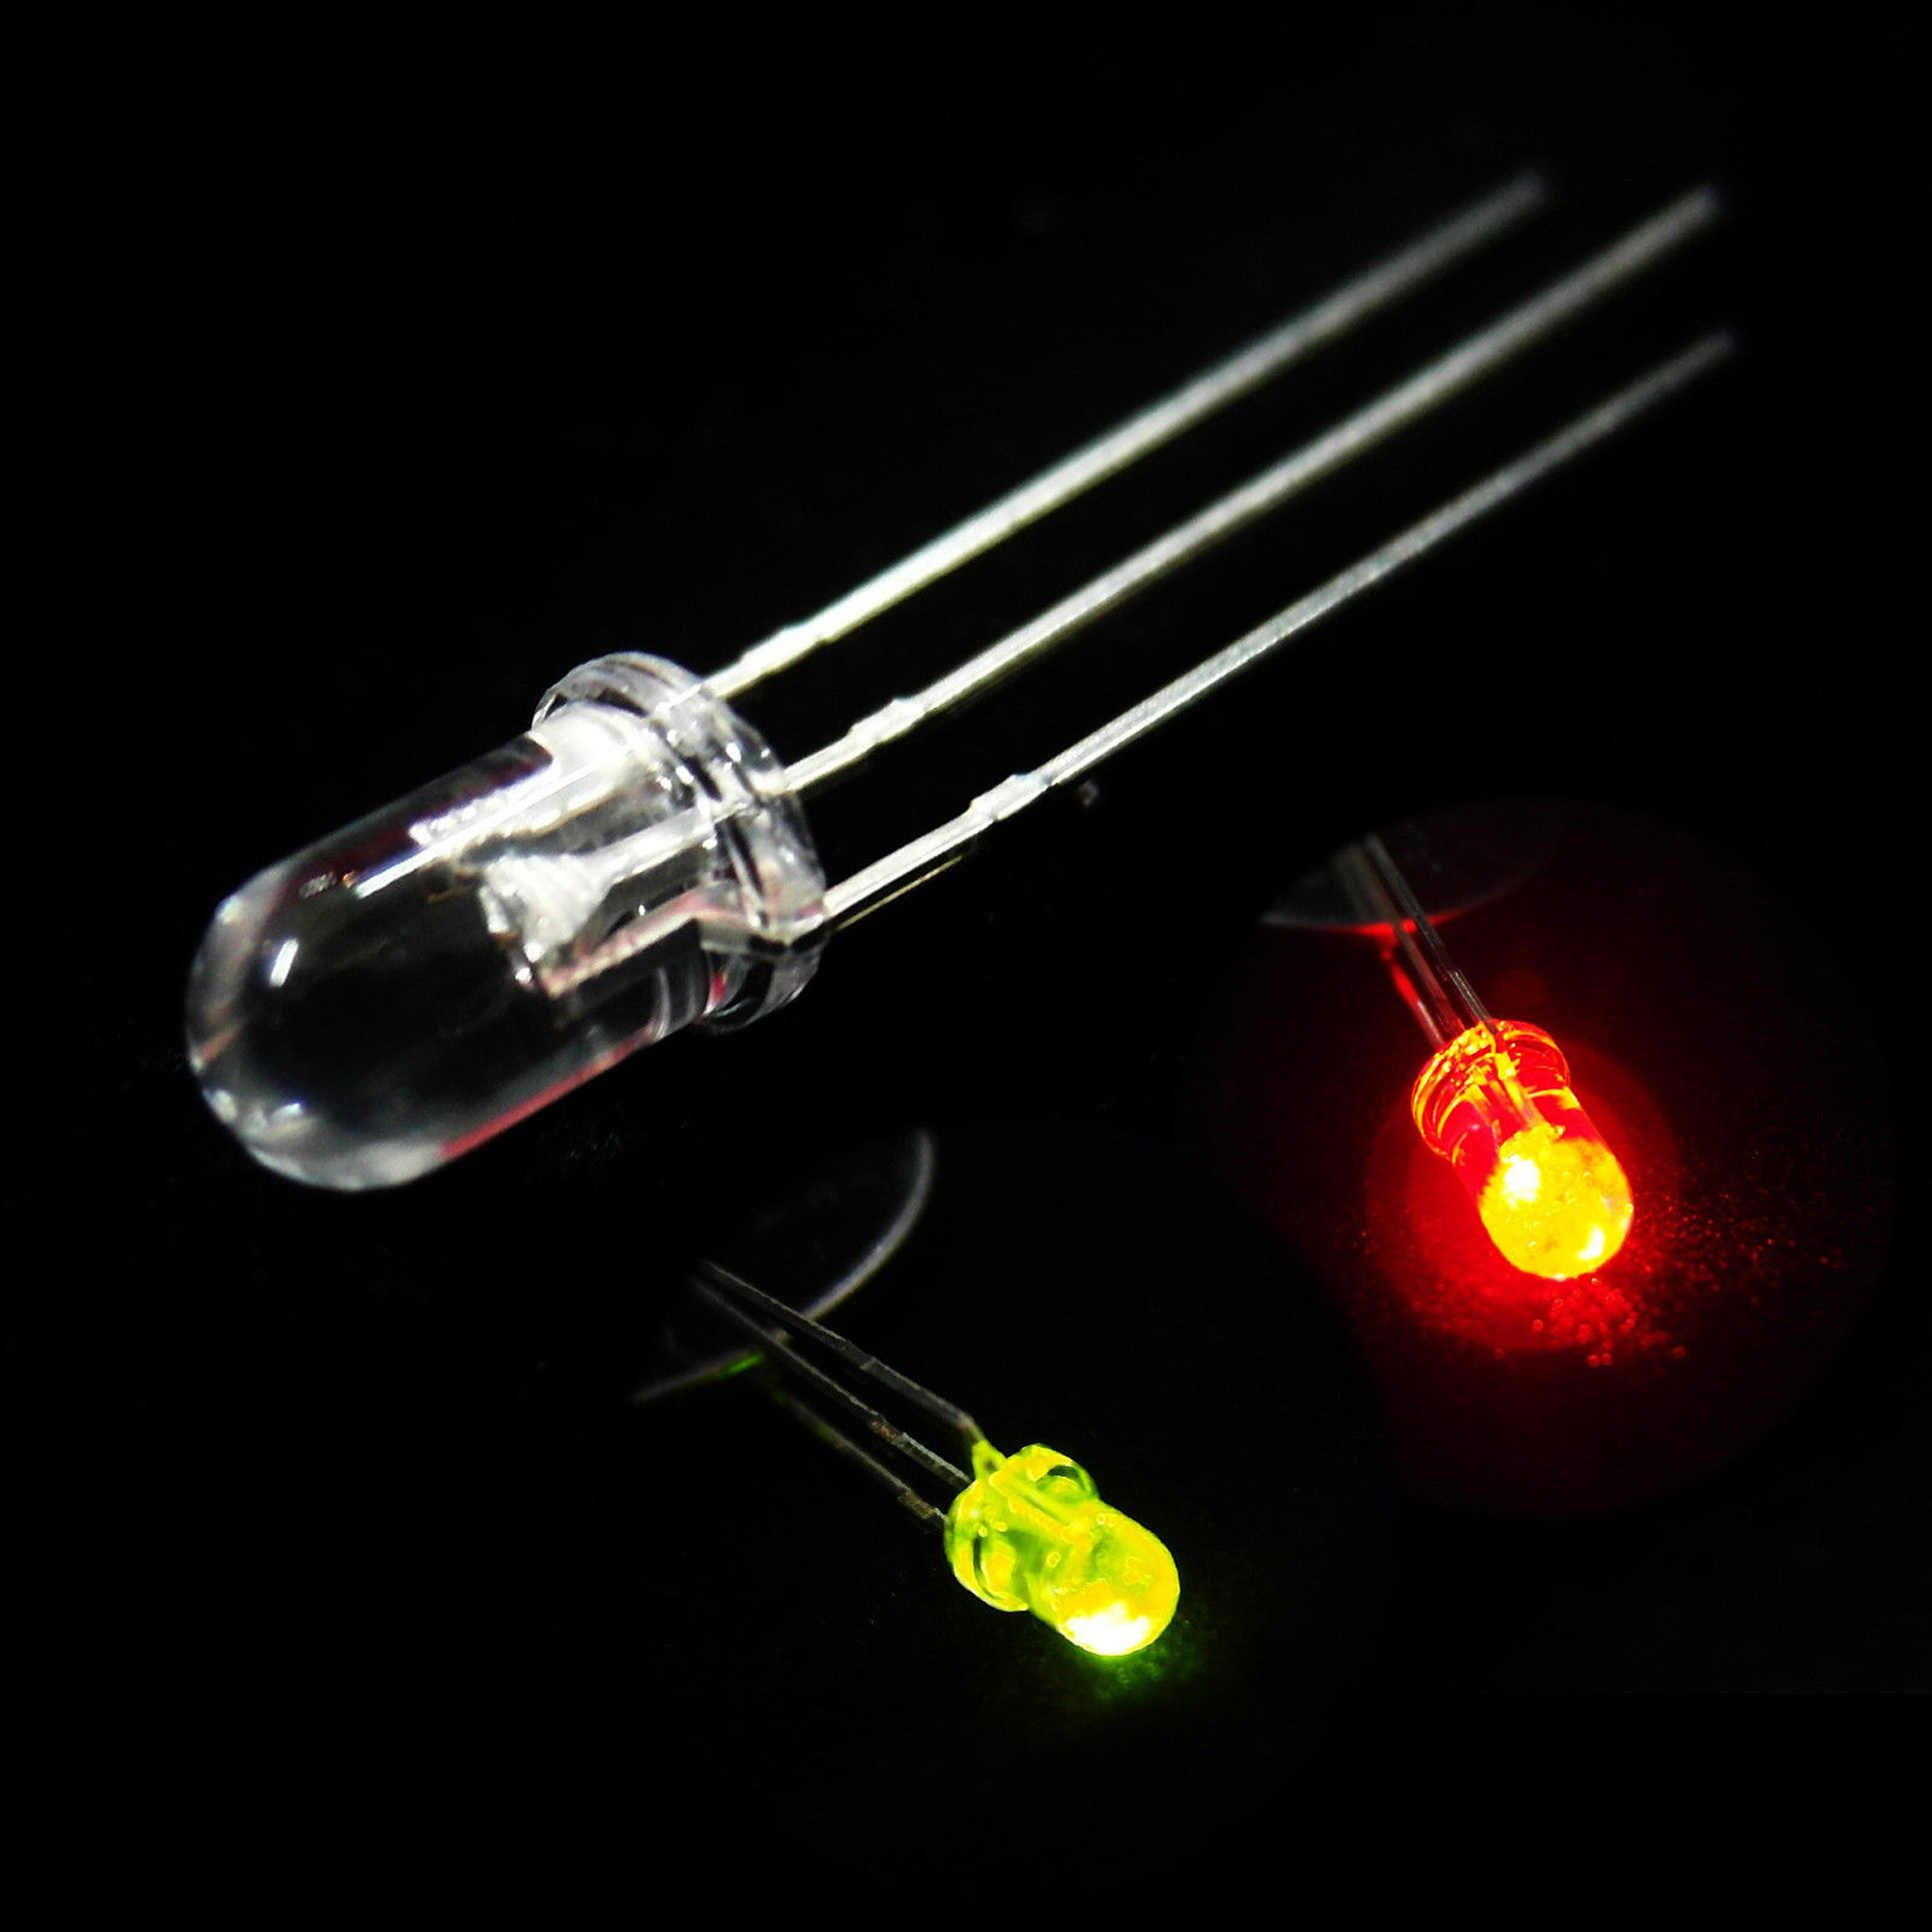 Led Red Green Dual Color 5mm common cathode. Led Diode Red Green Radial discrete Dual Color 5mm common cathode. Xp50 светодиод. Светодиоды 3v общий анод. Светодиод 3 мм